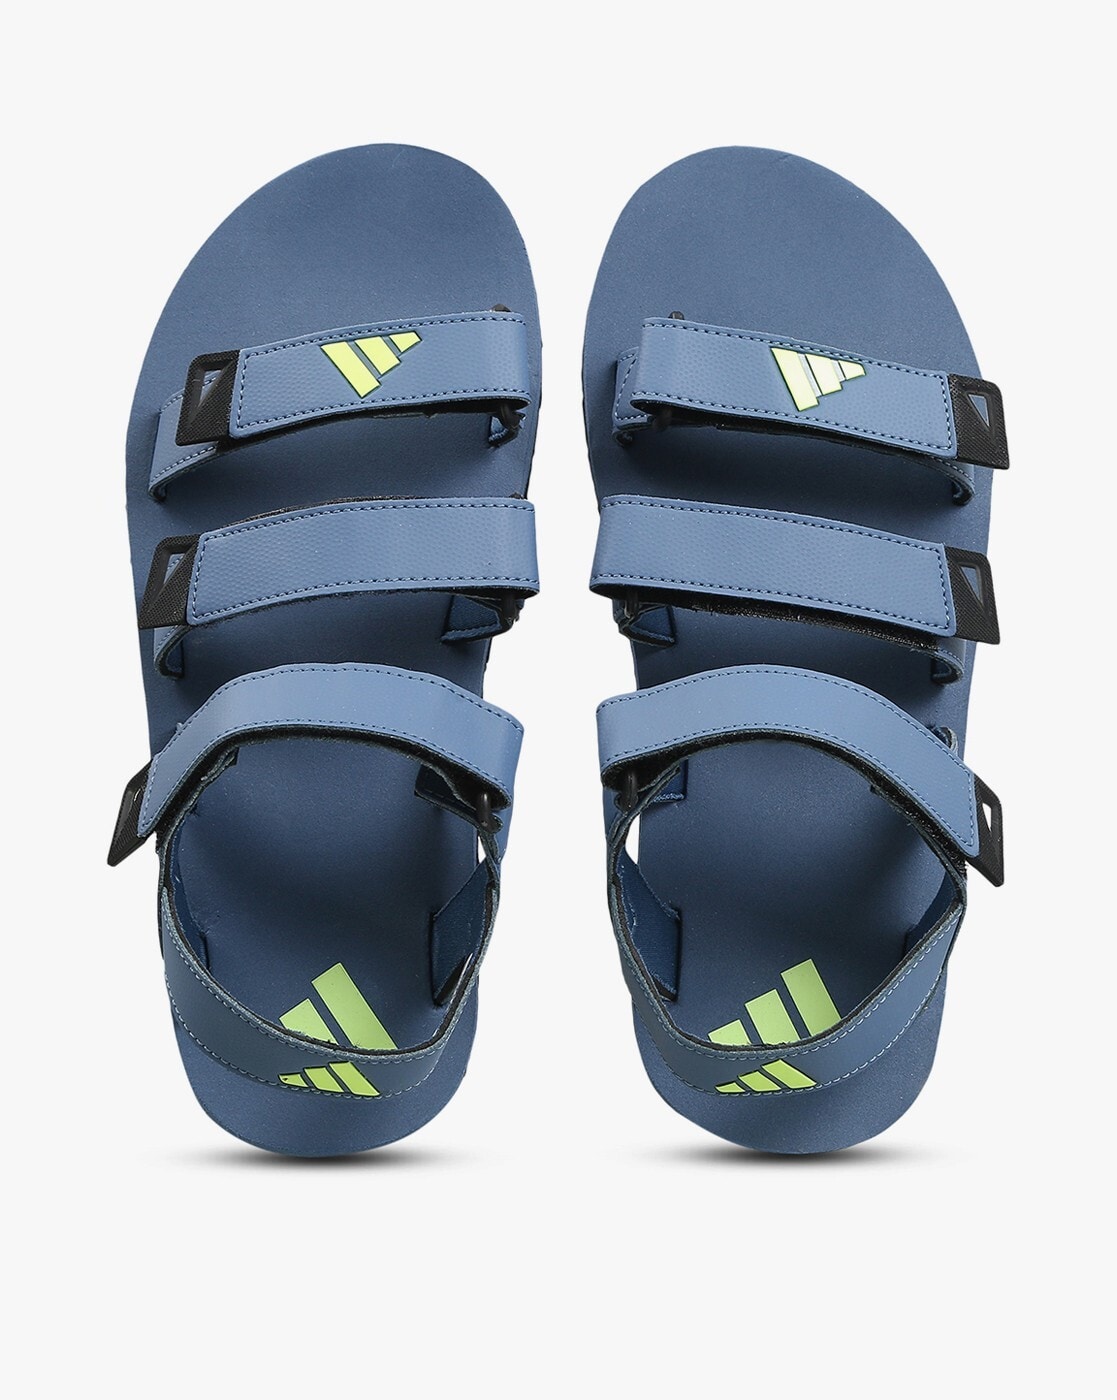 Buy Adidas Gladi 2.0 Navy Floater Sandals for Men at Best Price @ Tata CLiQ